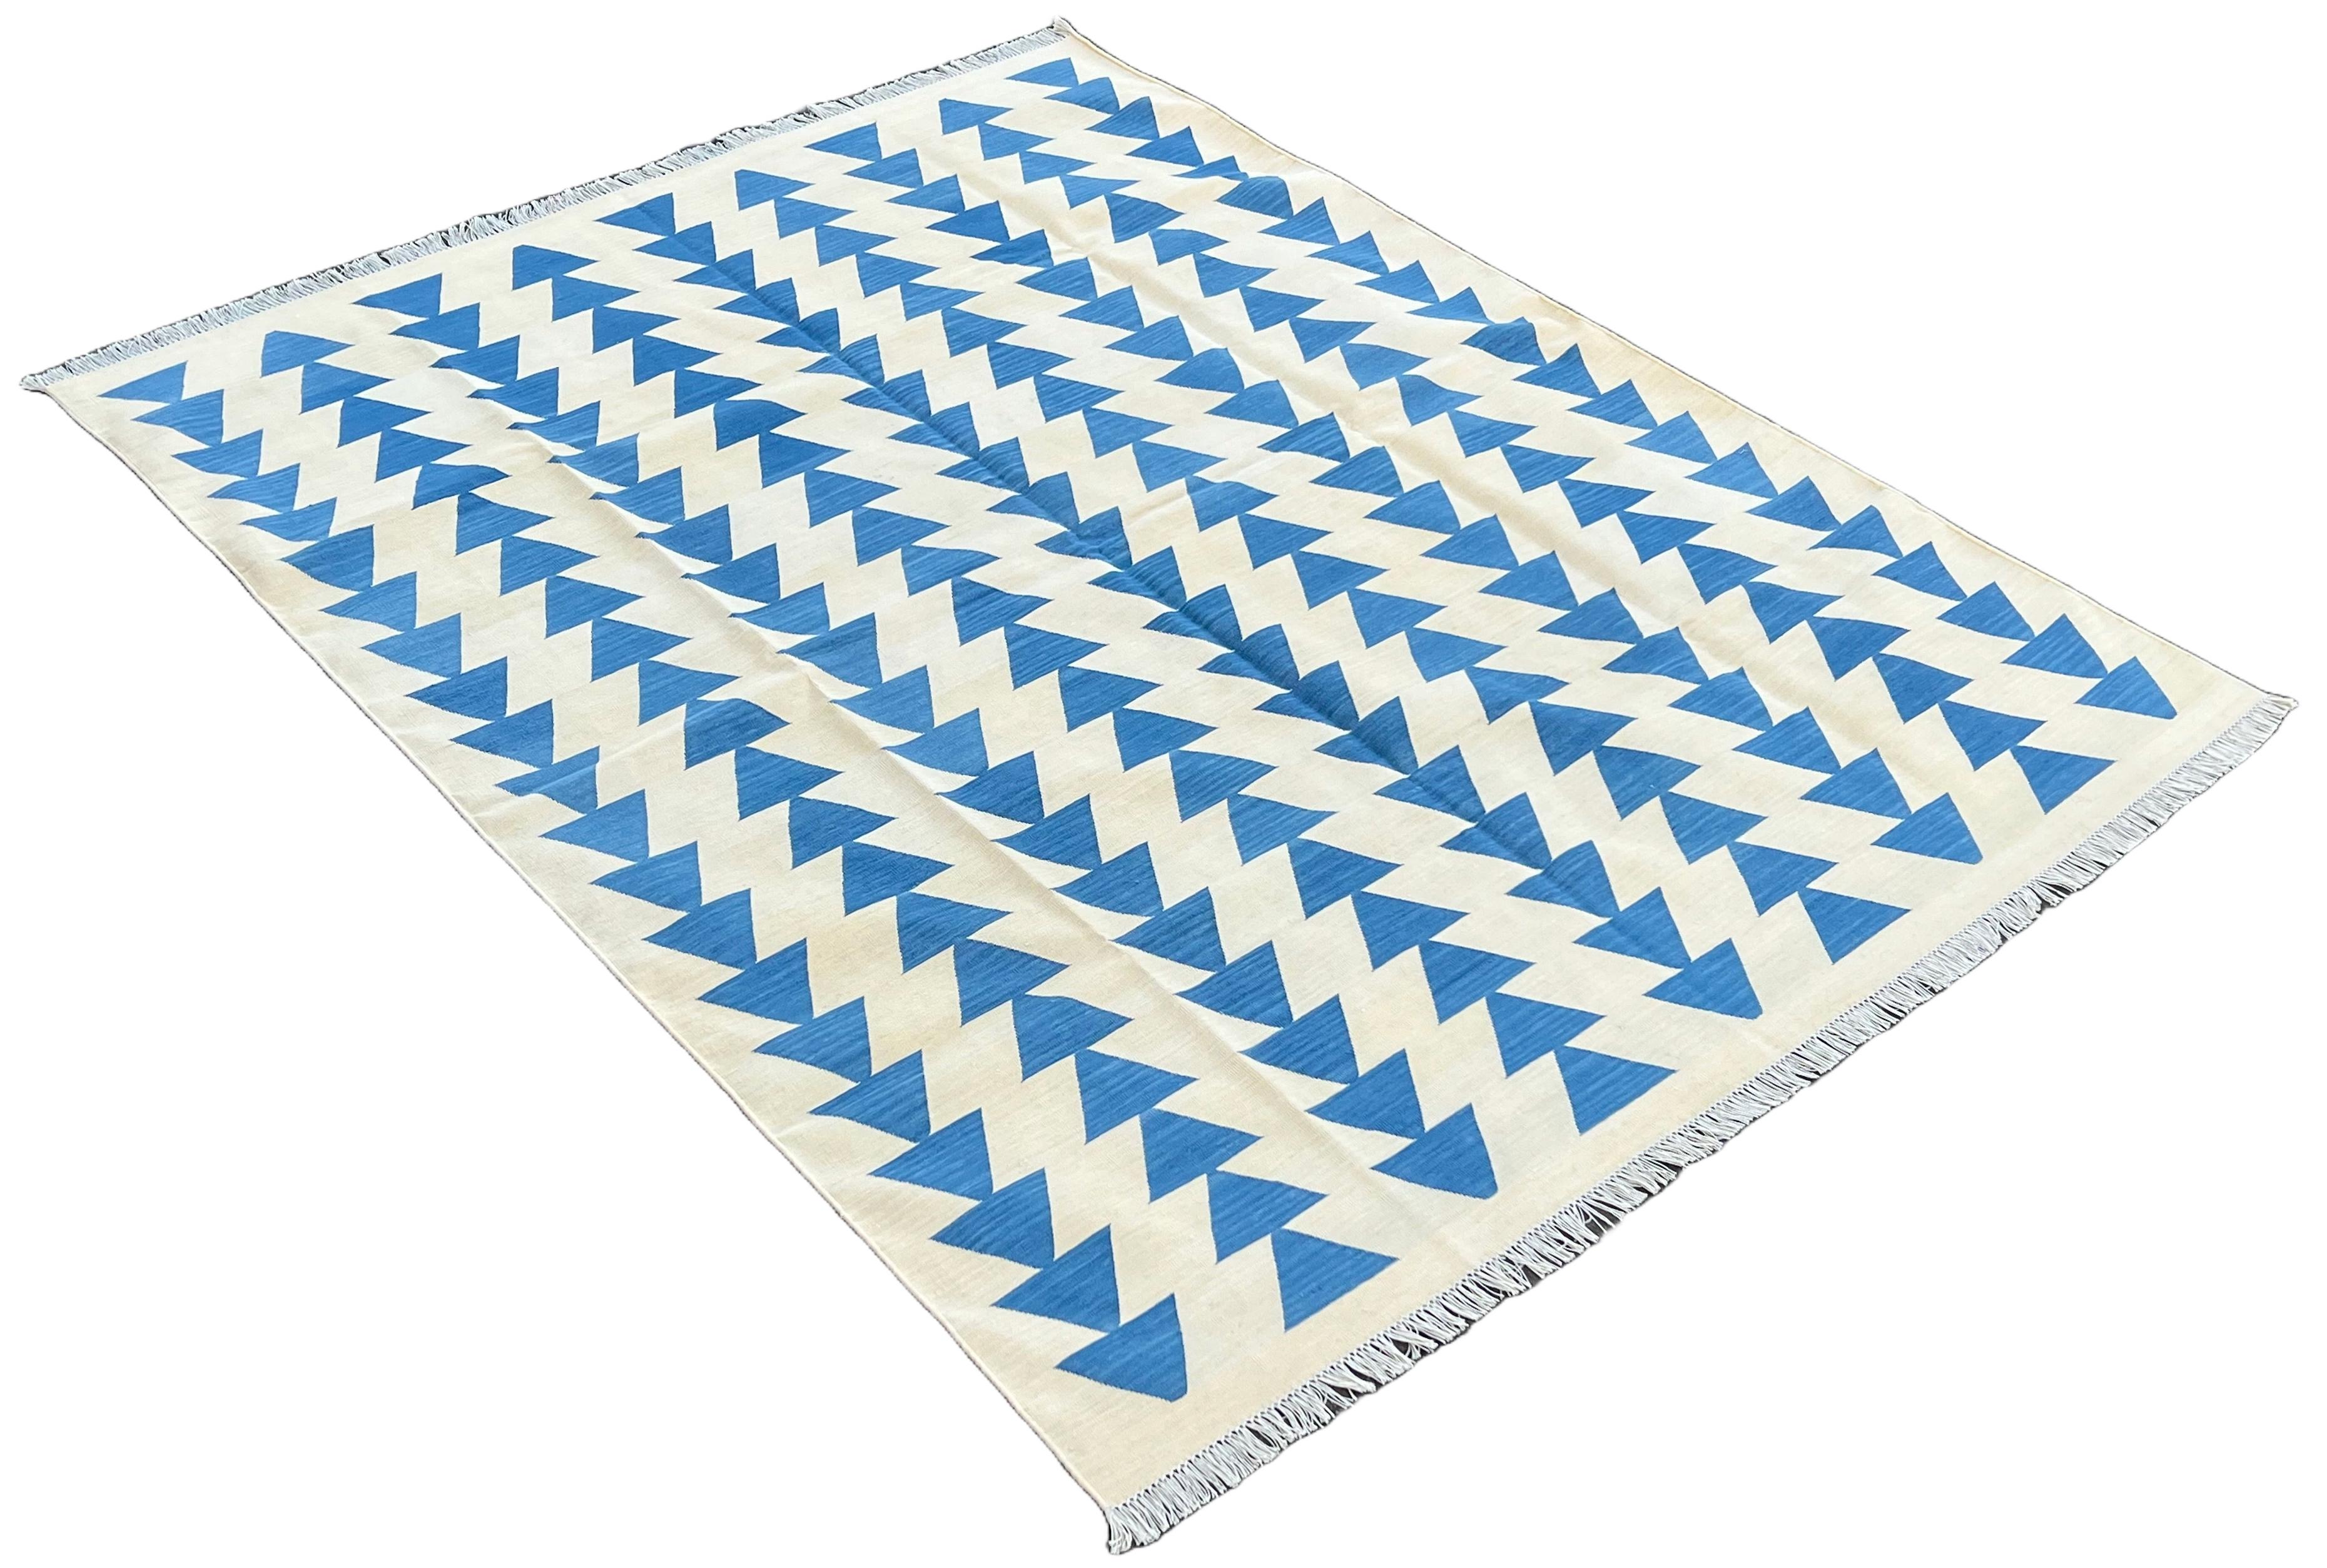 Cotton Natural Vegetable Dyed Cream And Blue Pyramid Checked Indian Rug-6'x9'
These special flat-weave dhurries are hand-woven with 15 ply 100% cotton yarn. Due to the special manufacturing techniques used to create our rugs, the size and color of